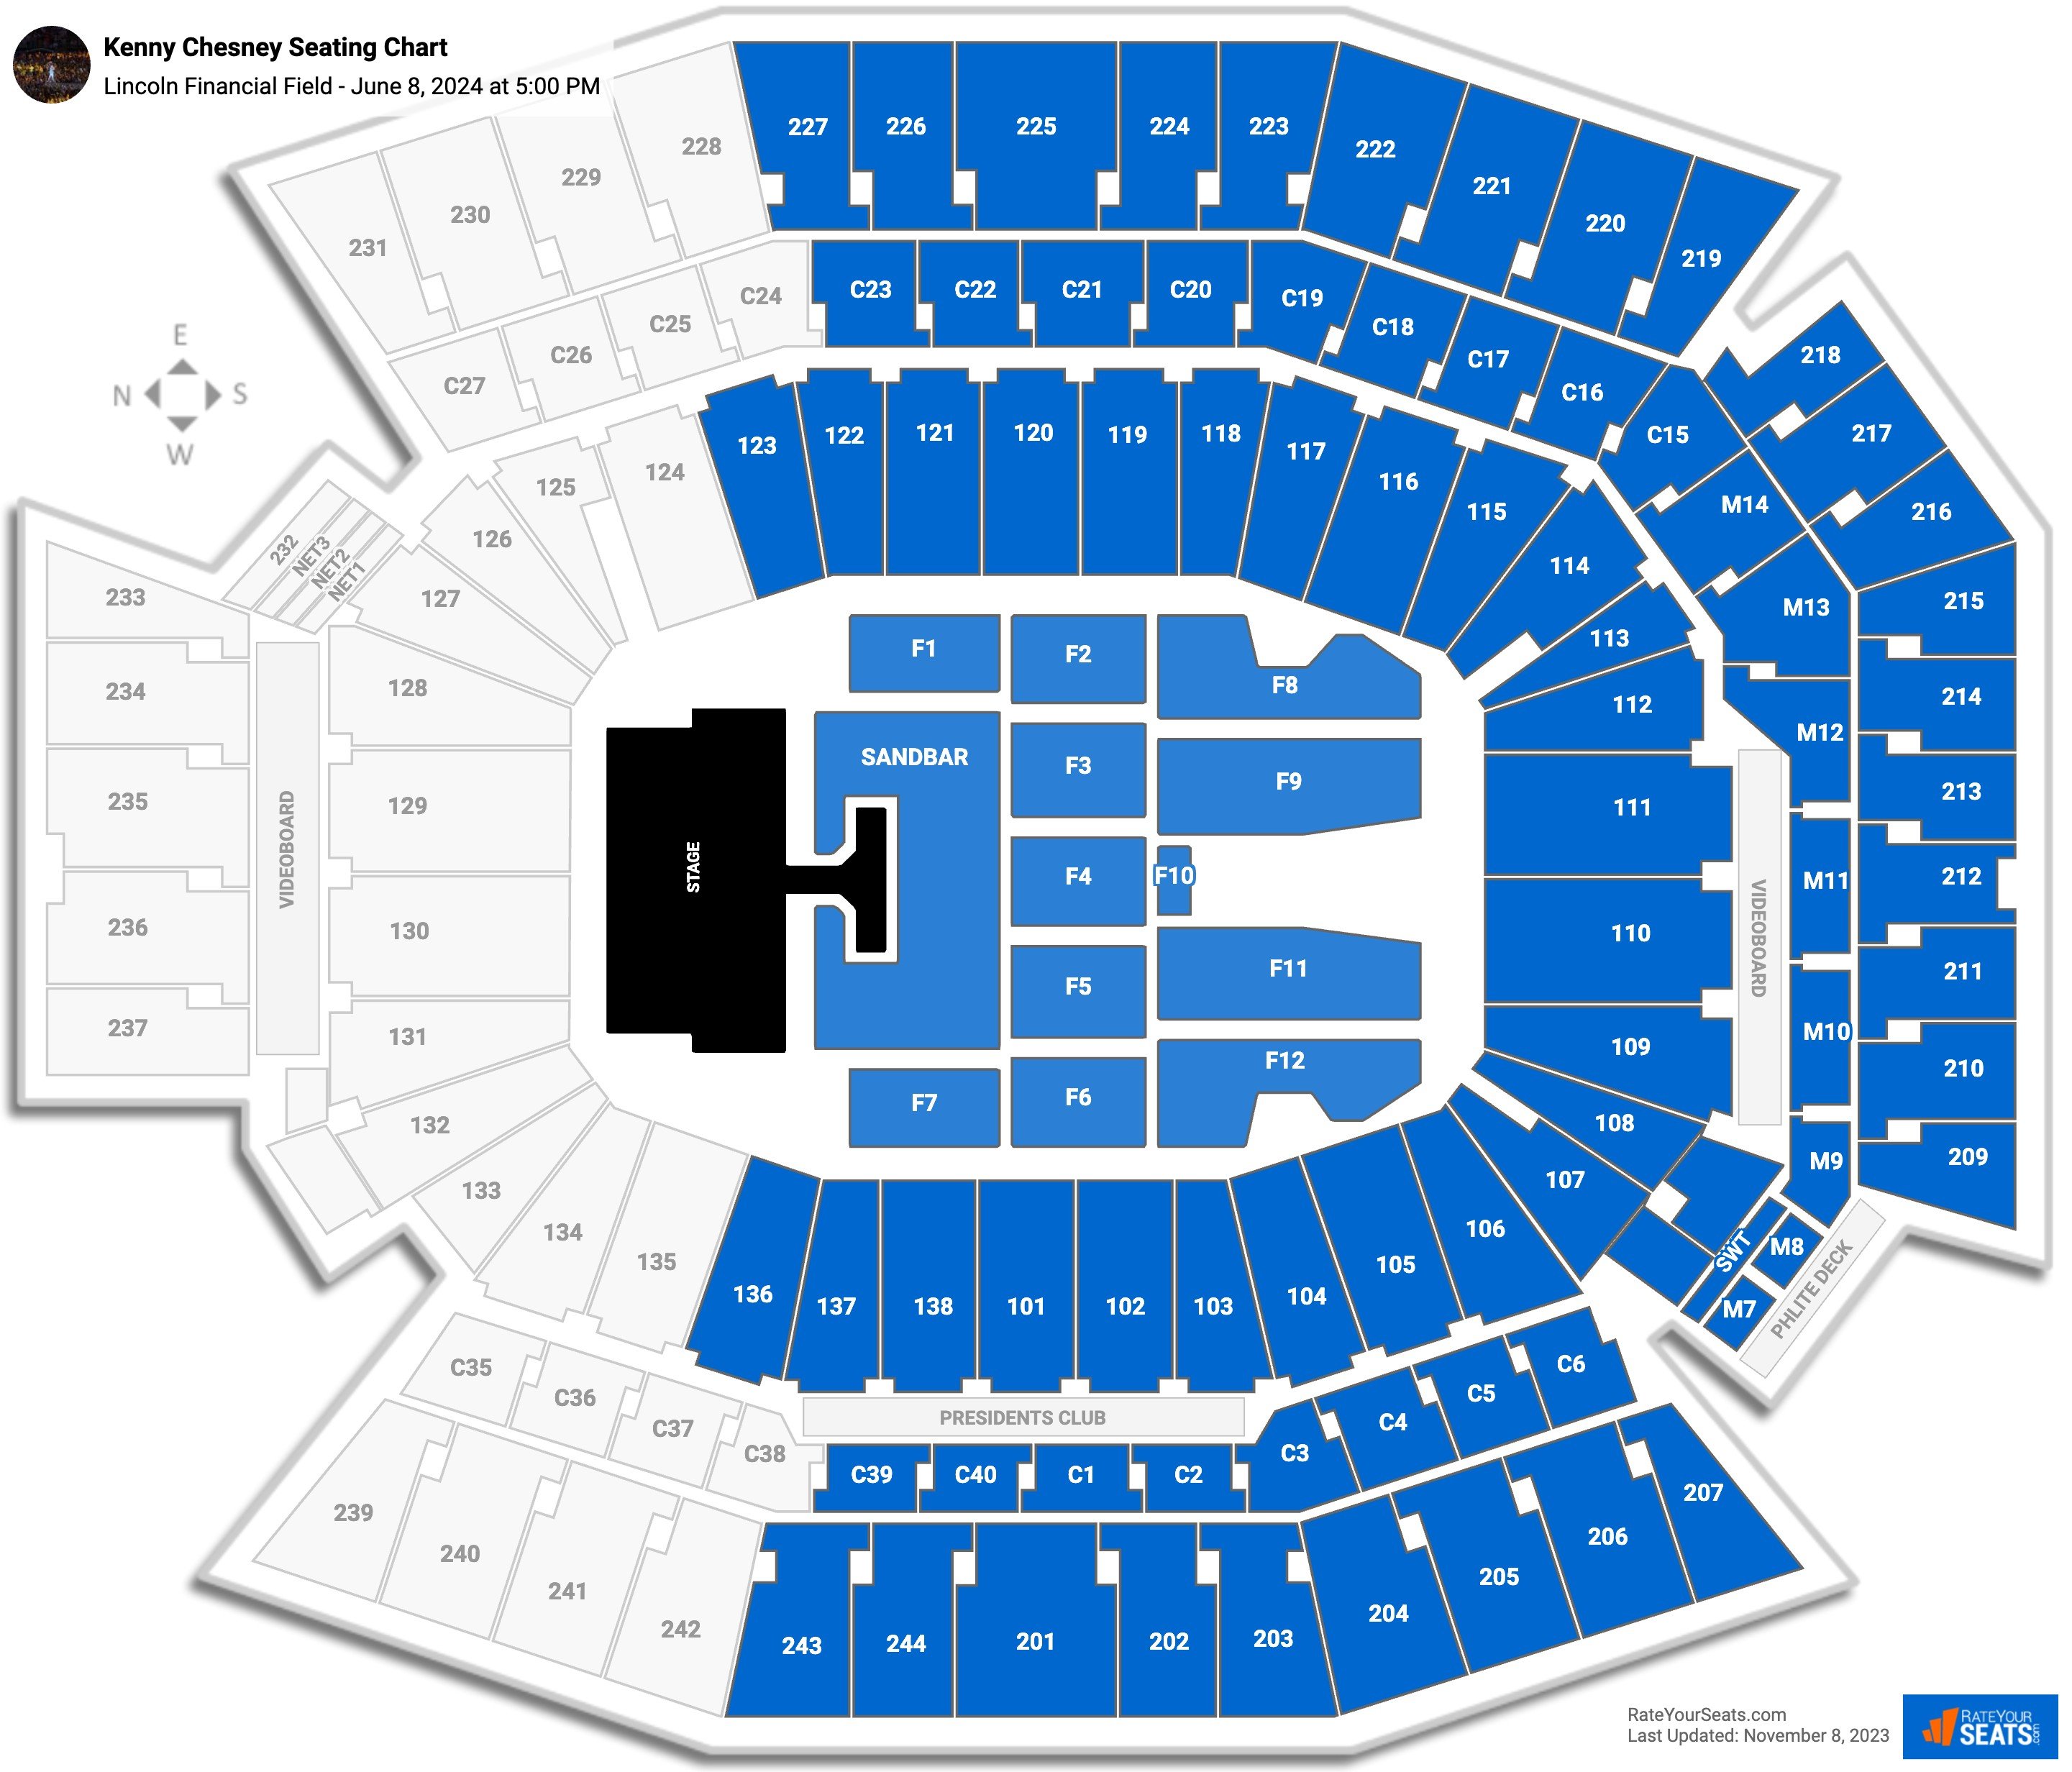 Lincoln Financial Field Concert Seating Chart - RateYourSeats.com